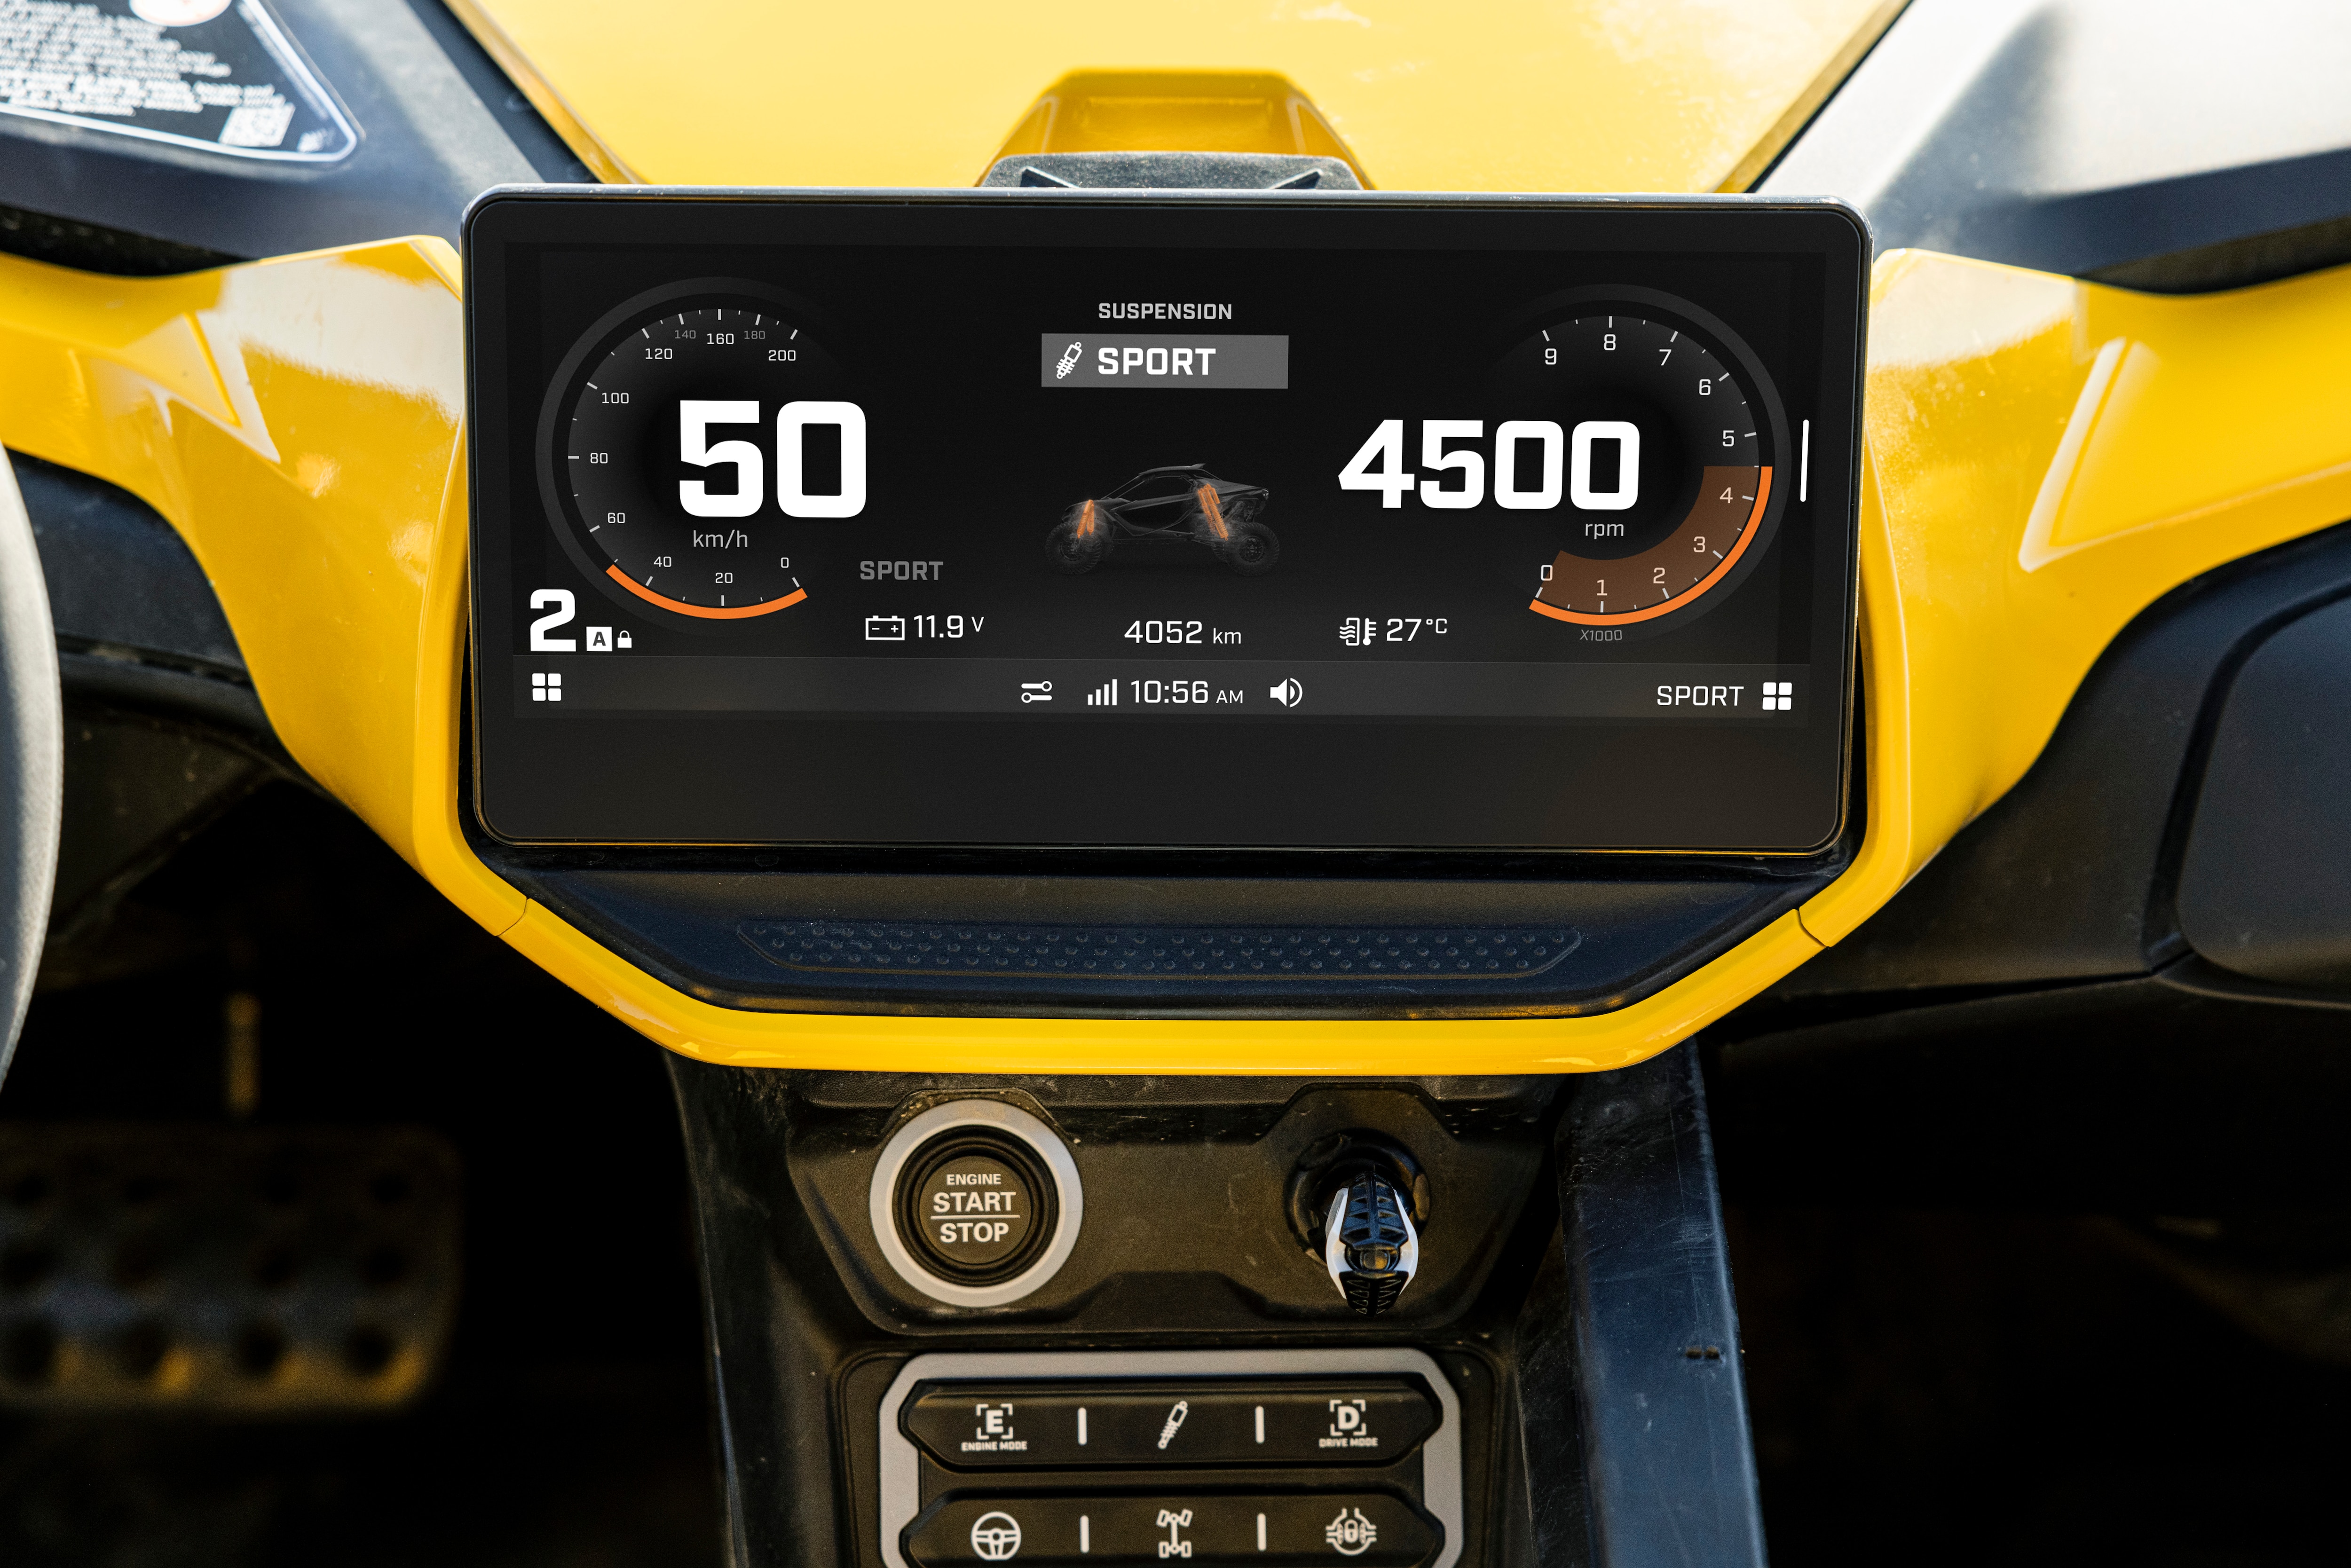 Touchscreen display in a Can-Am Off-Road SxS vehicle